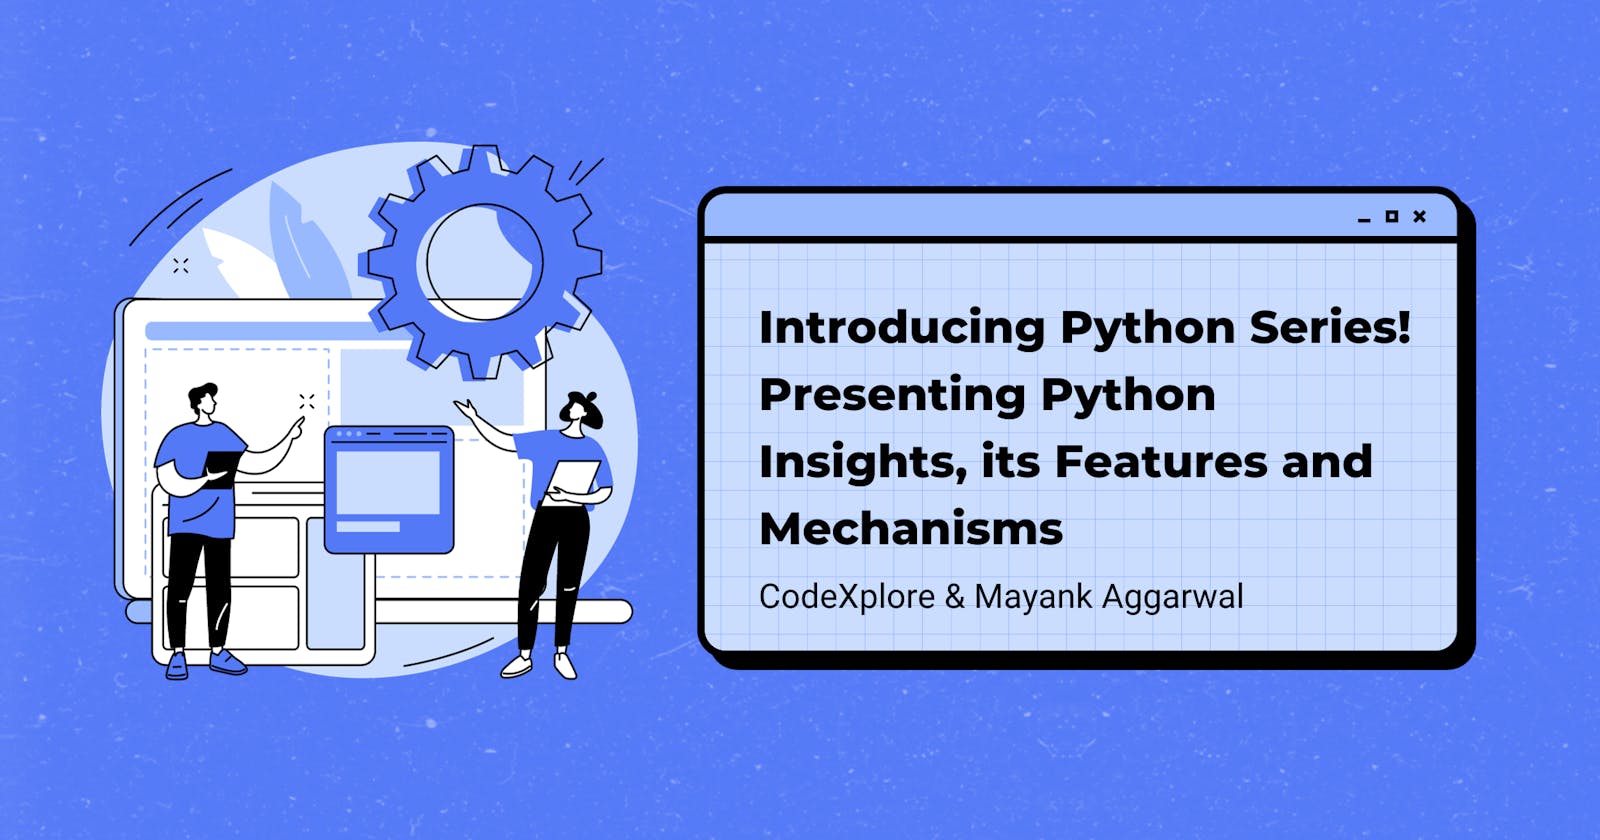 Thrilling Announcement! Presenting Our Latest Python Insights, its Features and Mechanisms 🎉